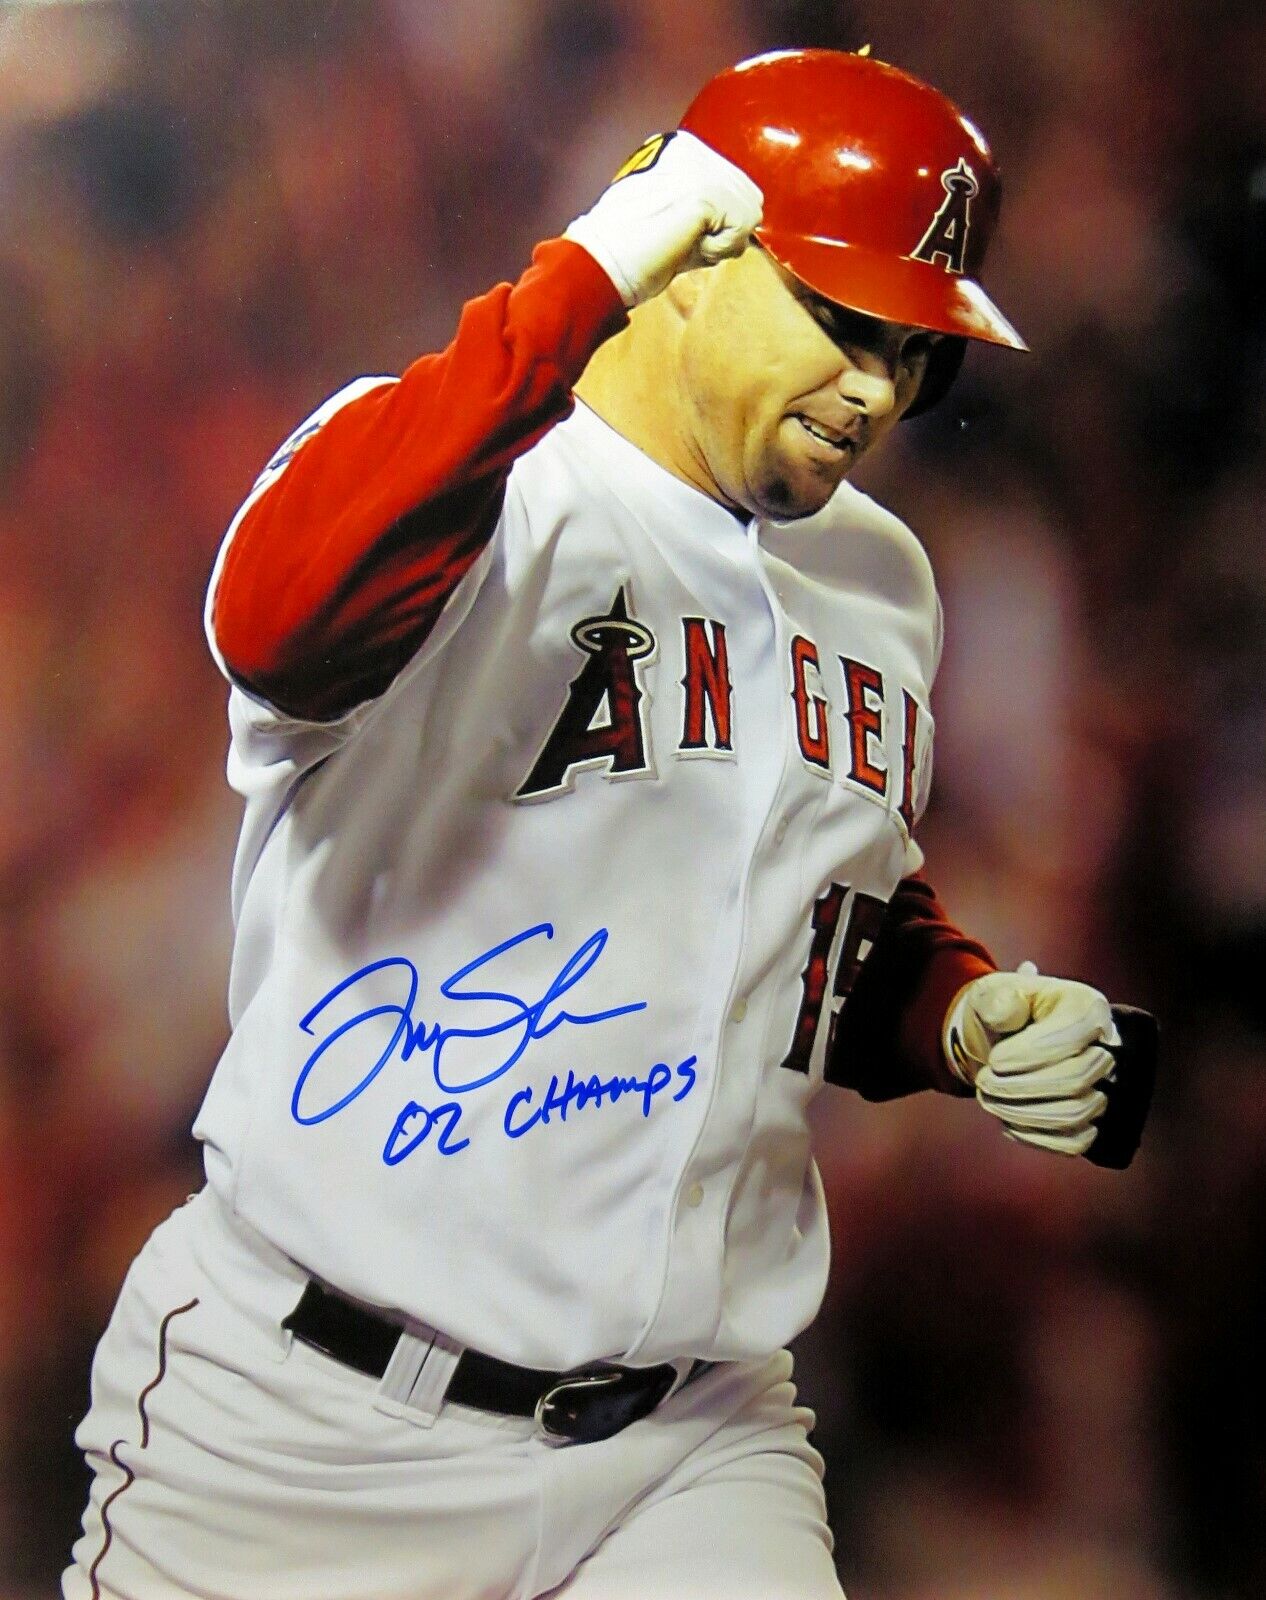 Tim Salmon Signed Autographed 16X20 Photo Poster painting Angels Fist Pump 02 Champs